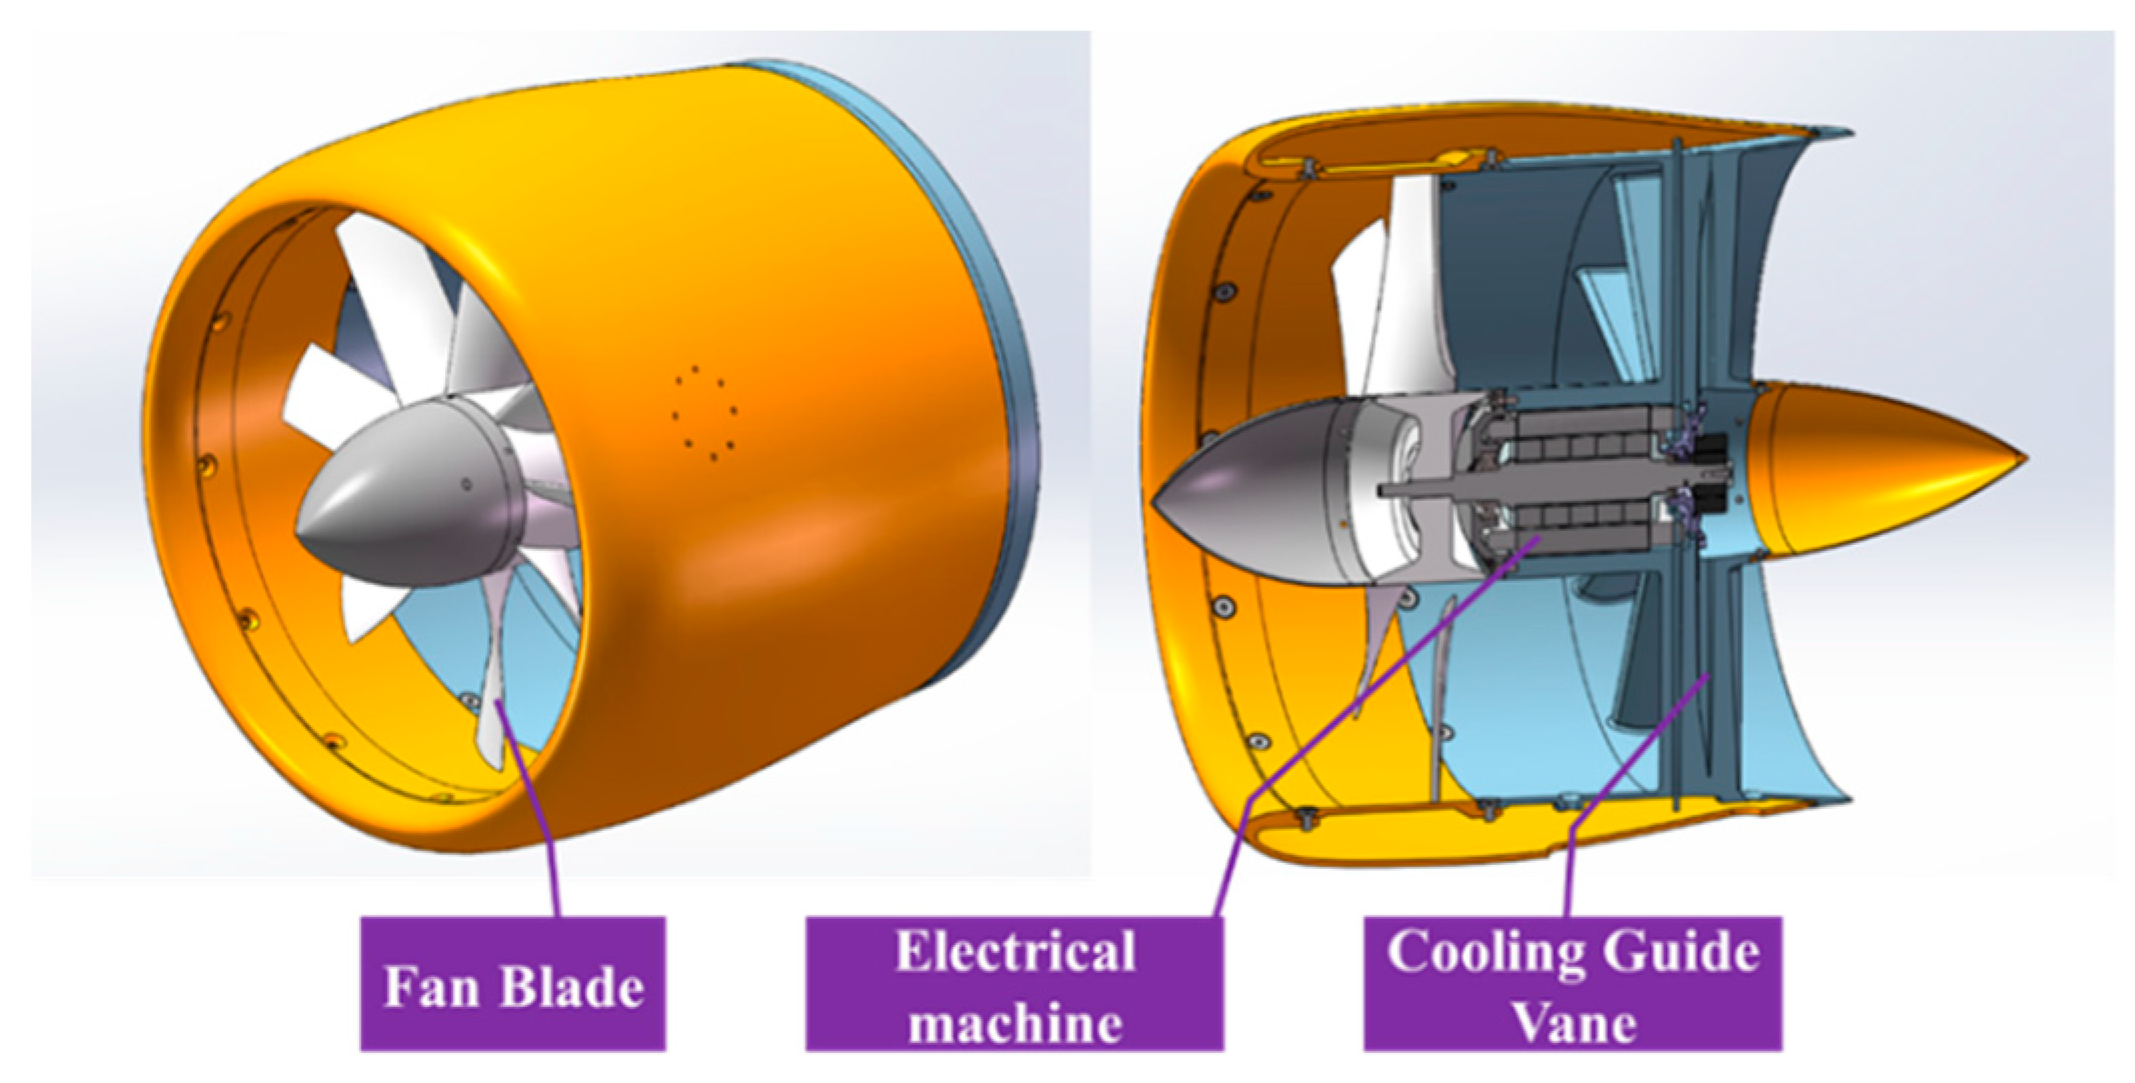 Aerospace | Free Full-Text | Thermal Benefits of a Cooling Guide Vane for Electrical Machine in an Electric Ducted Fan